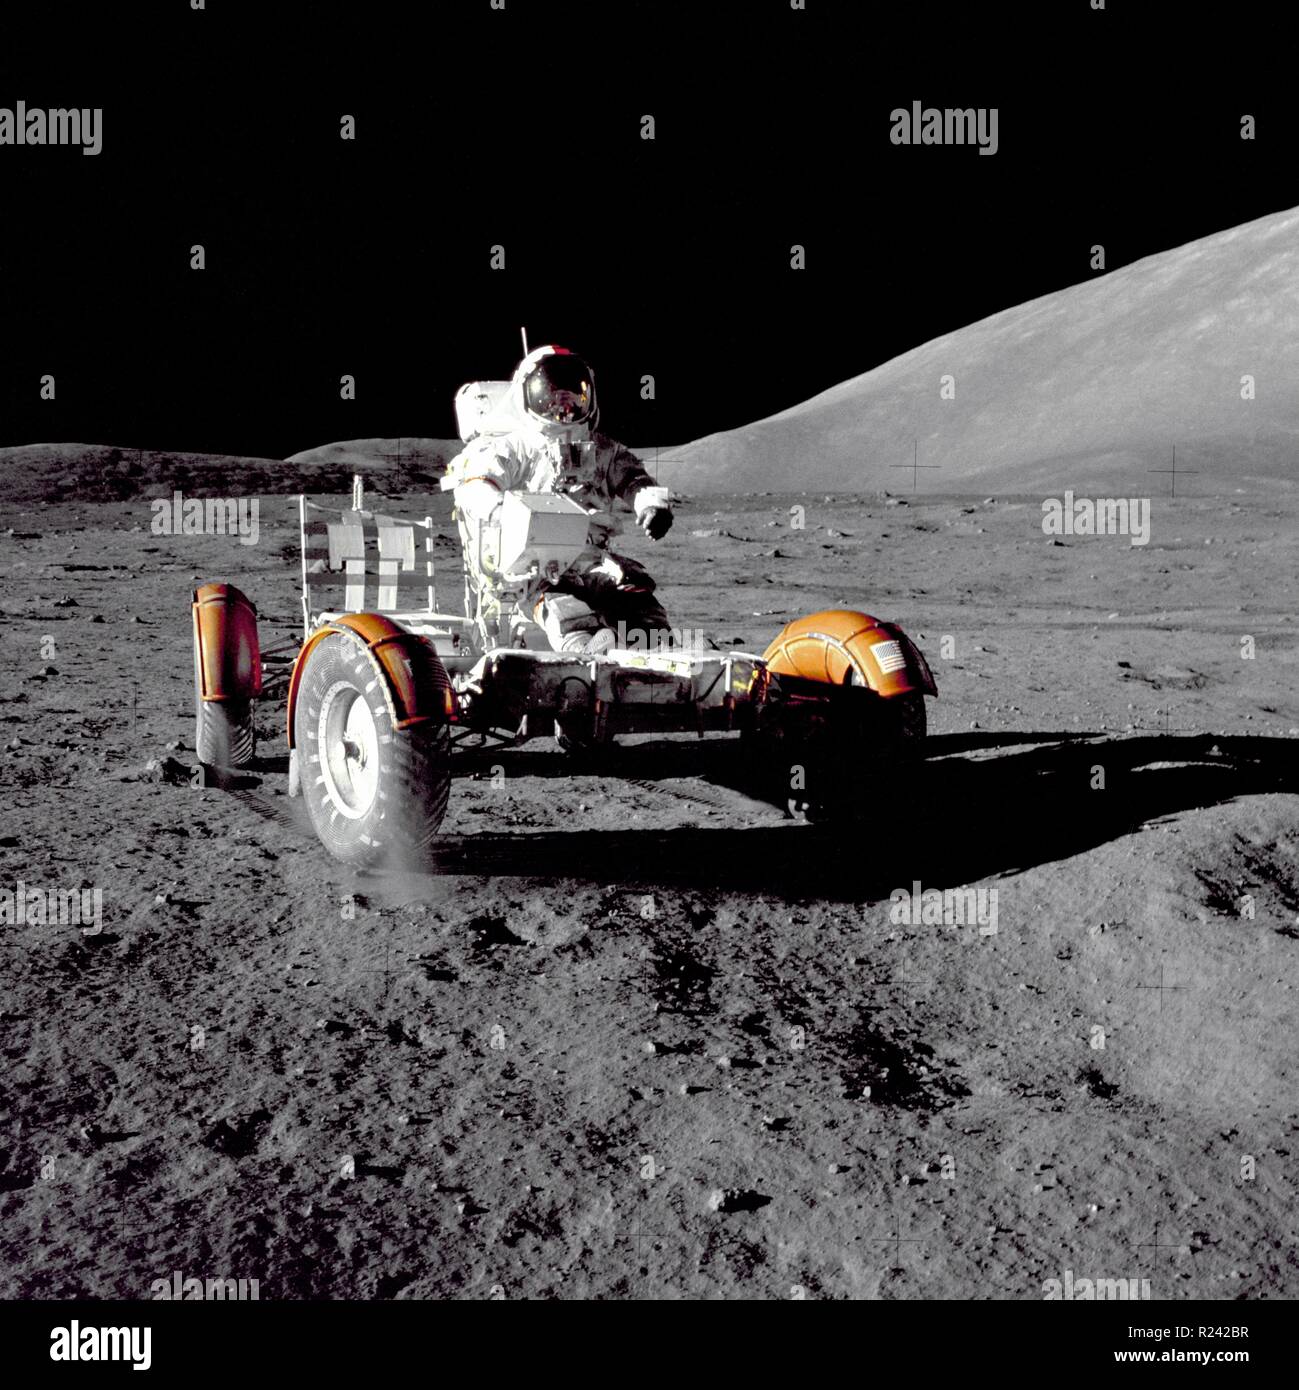 Apollo 17 commander Eugene Cernan test-drives the rover before it is loaded with gear to explore the lunar surface December 11, 1972 Stock Photo